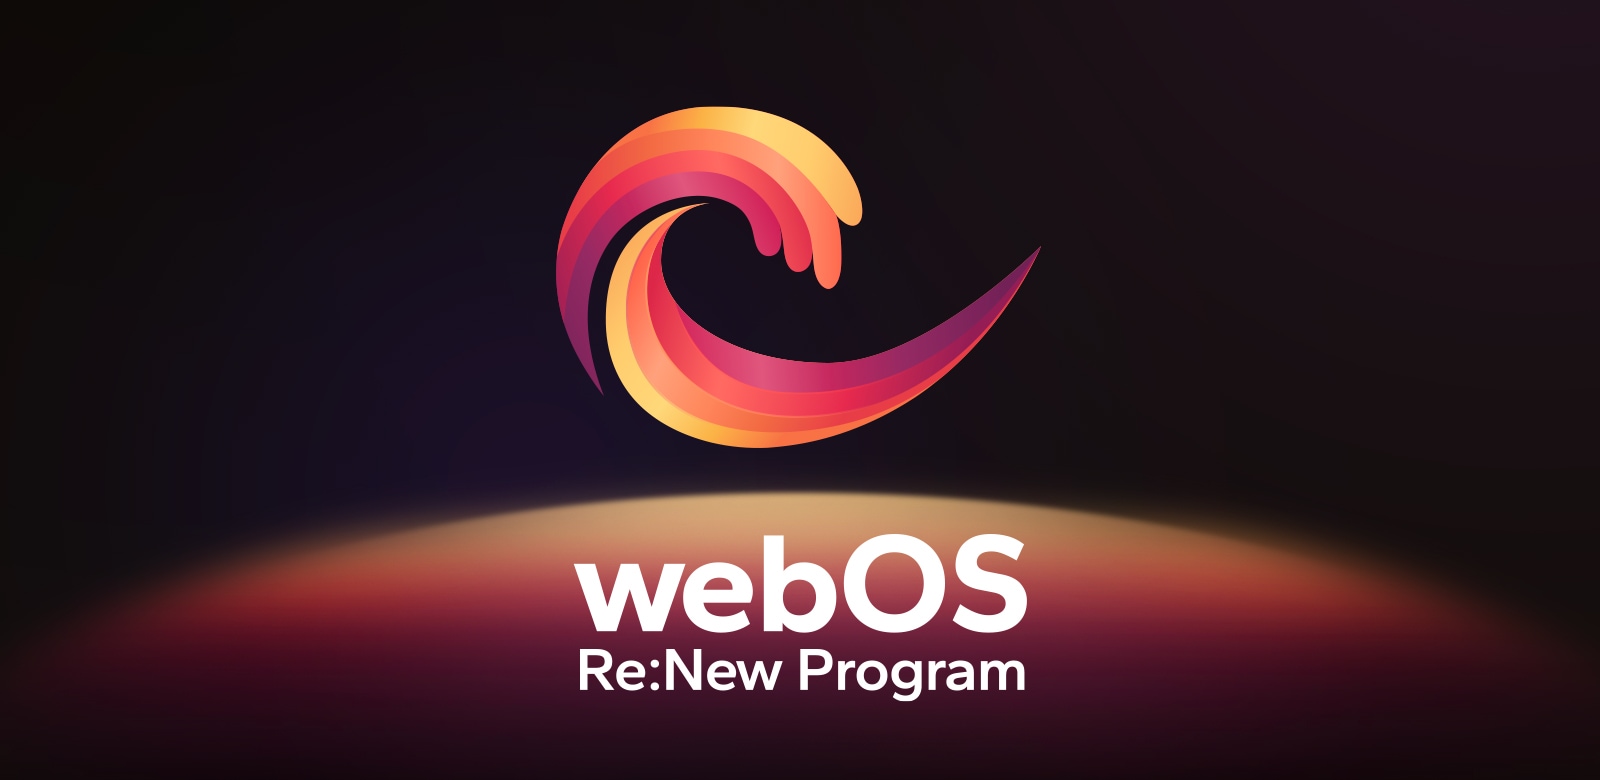 An image of the webOS Re:New Program logo against a black background with the top of a blue and purple circular sphere at the bottom.